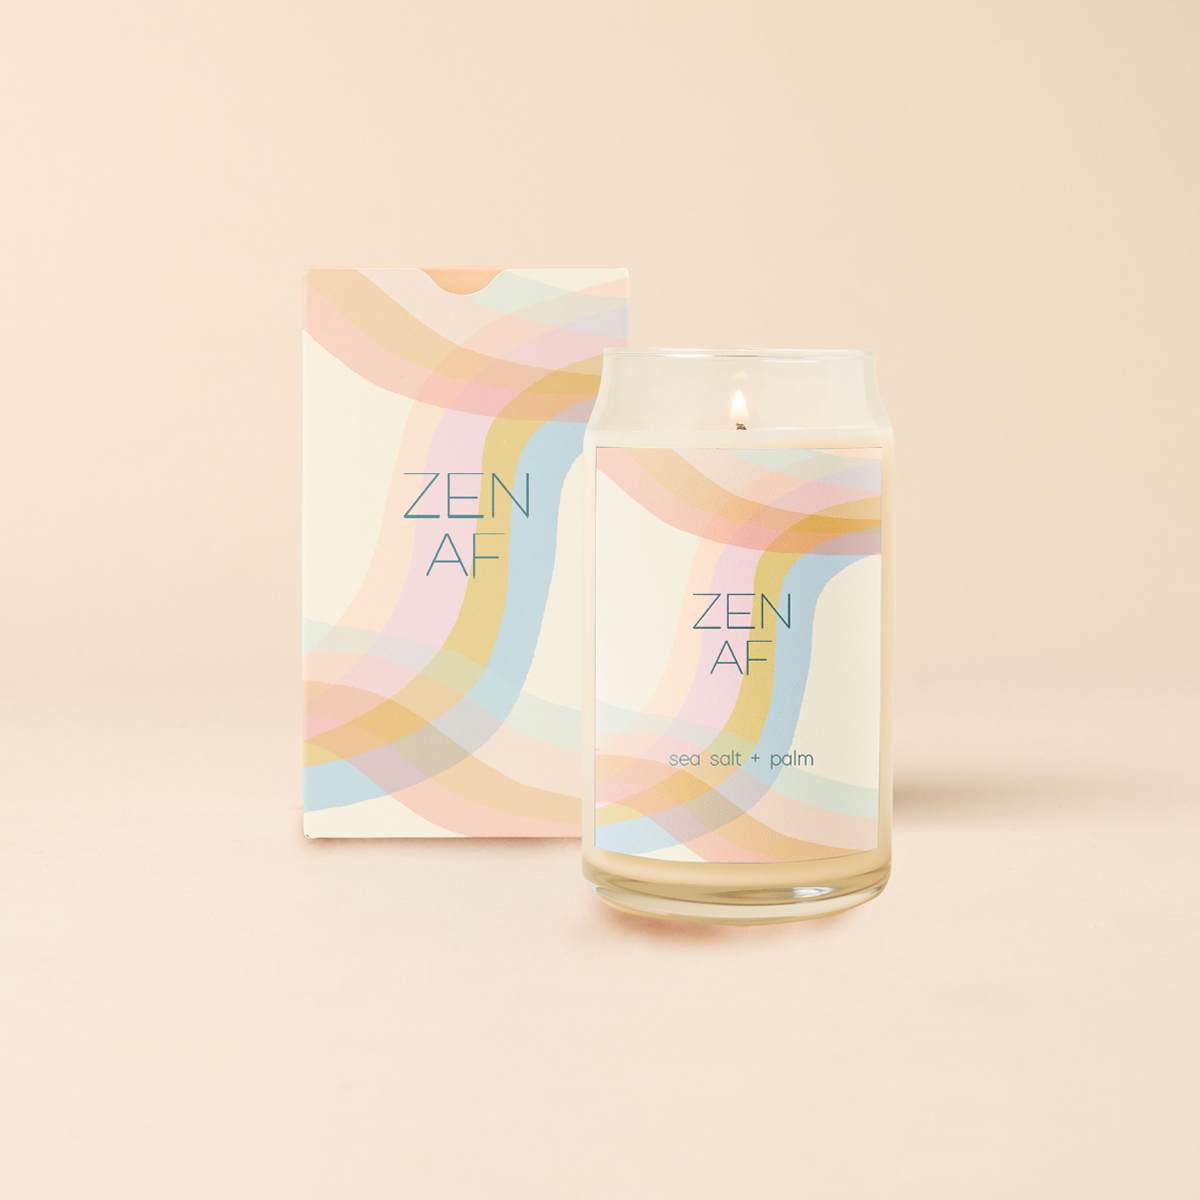 Candle Cans - Good Vibes Only: Manifest + Chill Waves